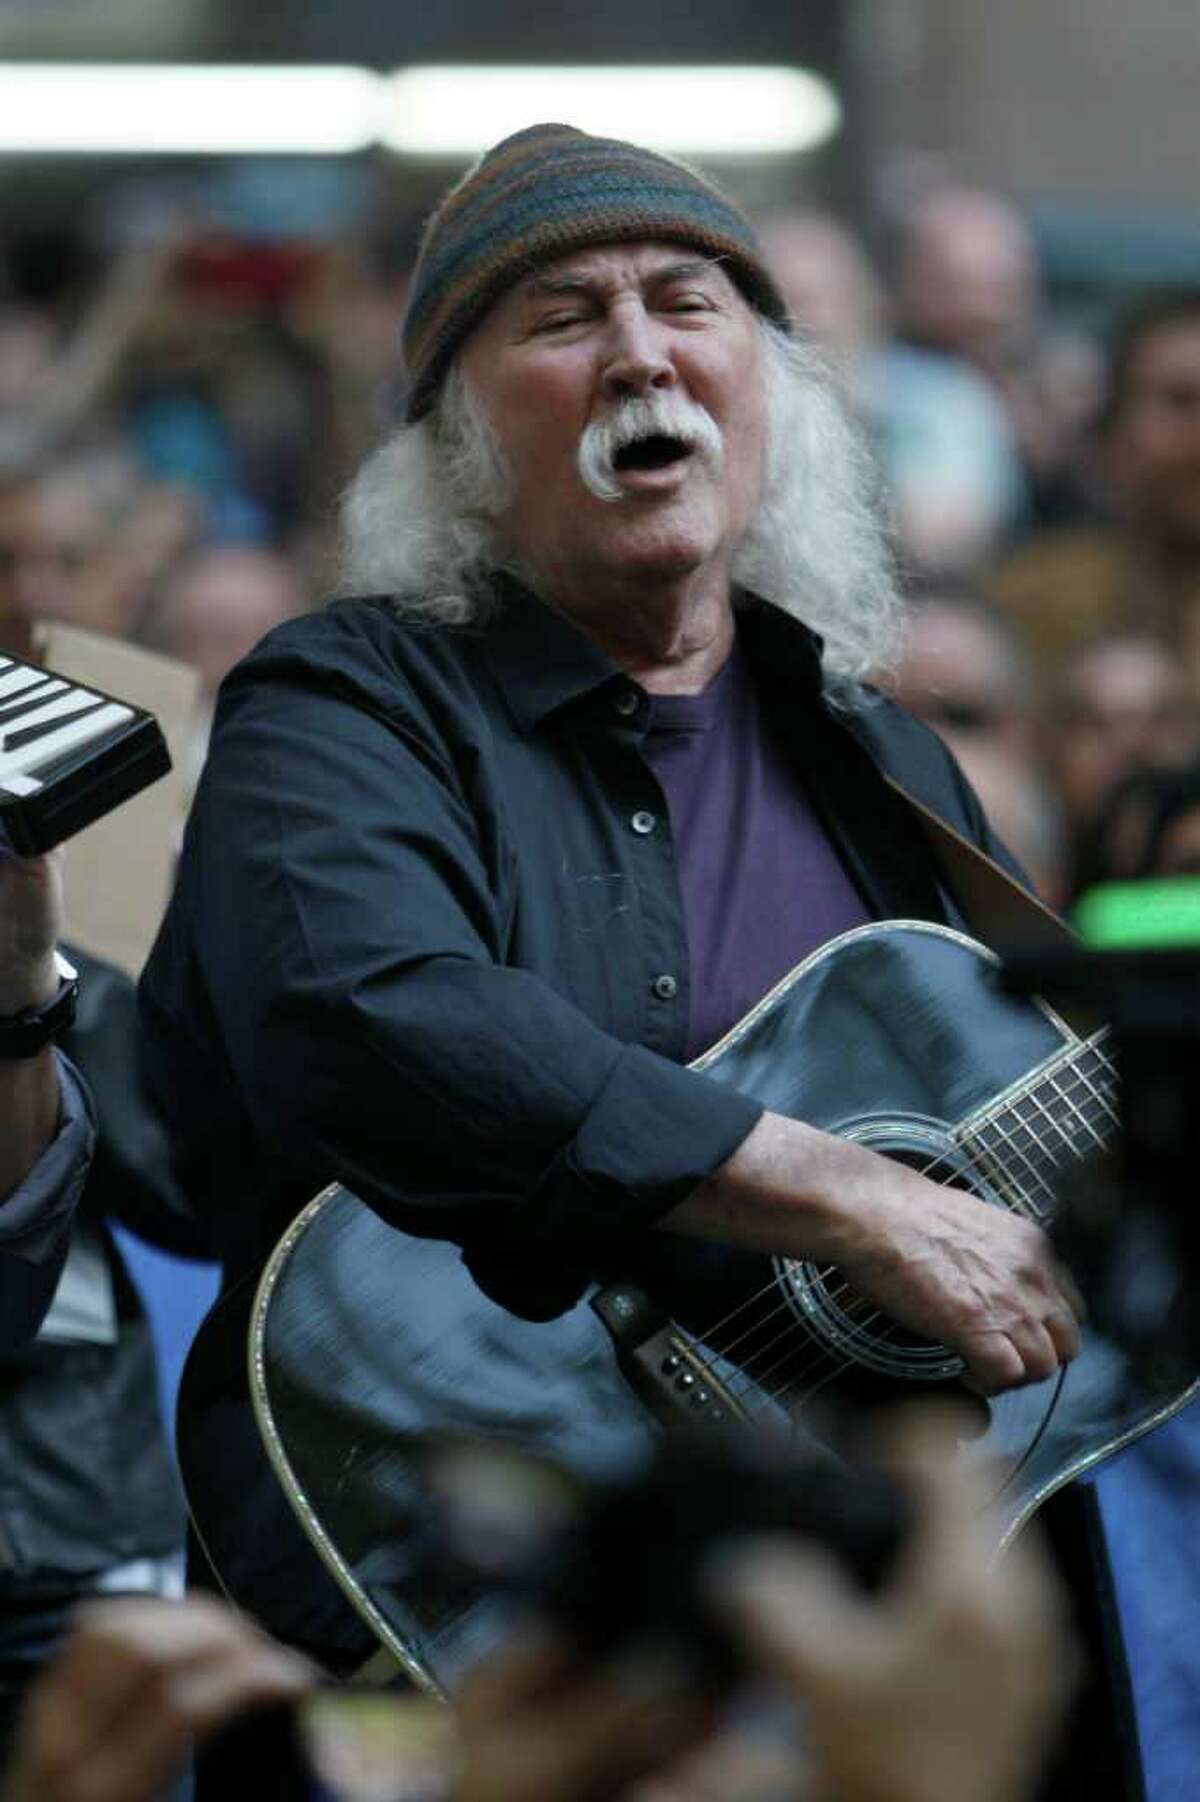 David Crosby performa at the Occupy Wall Street encampment at Zuccotti Park, Tuesday, Nov. 8, 2011 in New York. (AP Photo/Mary Altaffer)